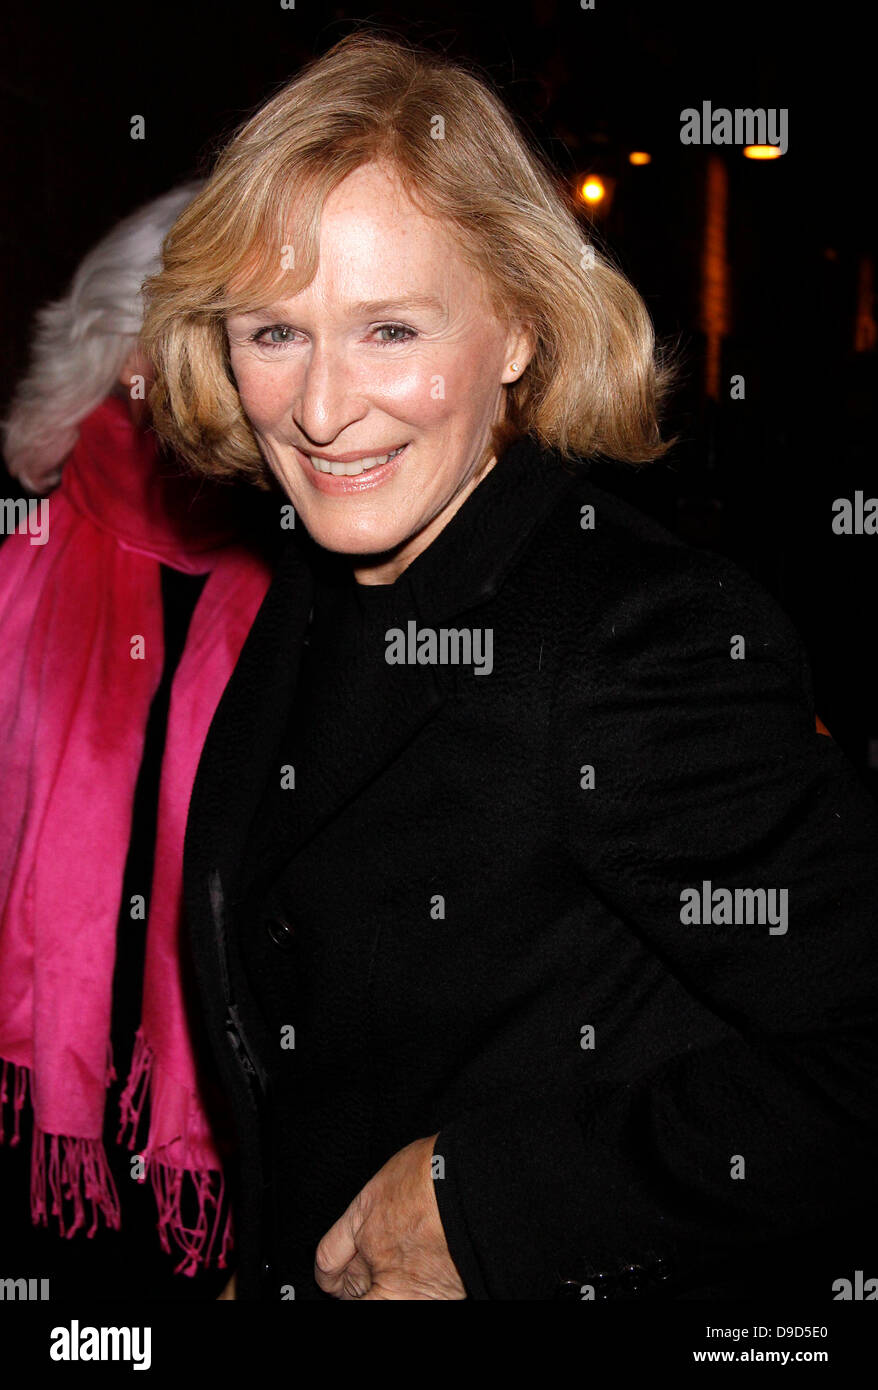 Glenn Close attends a performance of 'Love, Loss and What I Wore' now starring her daughter Annie Starke at the West Side Theatre New York City, USA - 24.03.11 Stock Photo